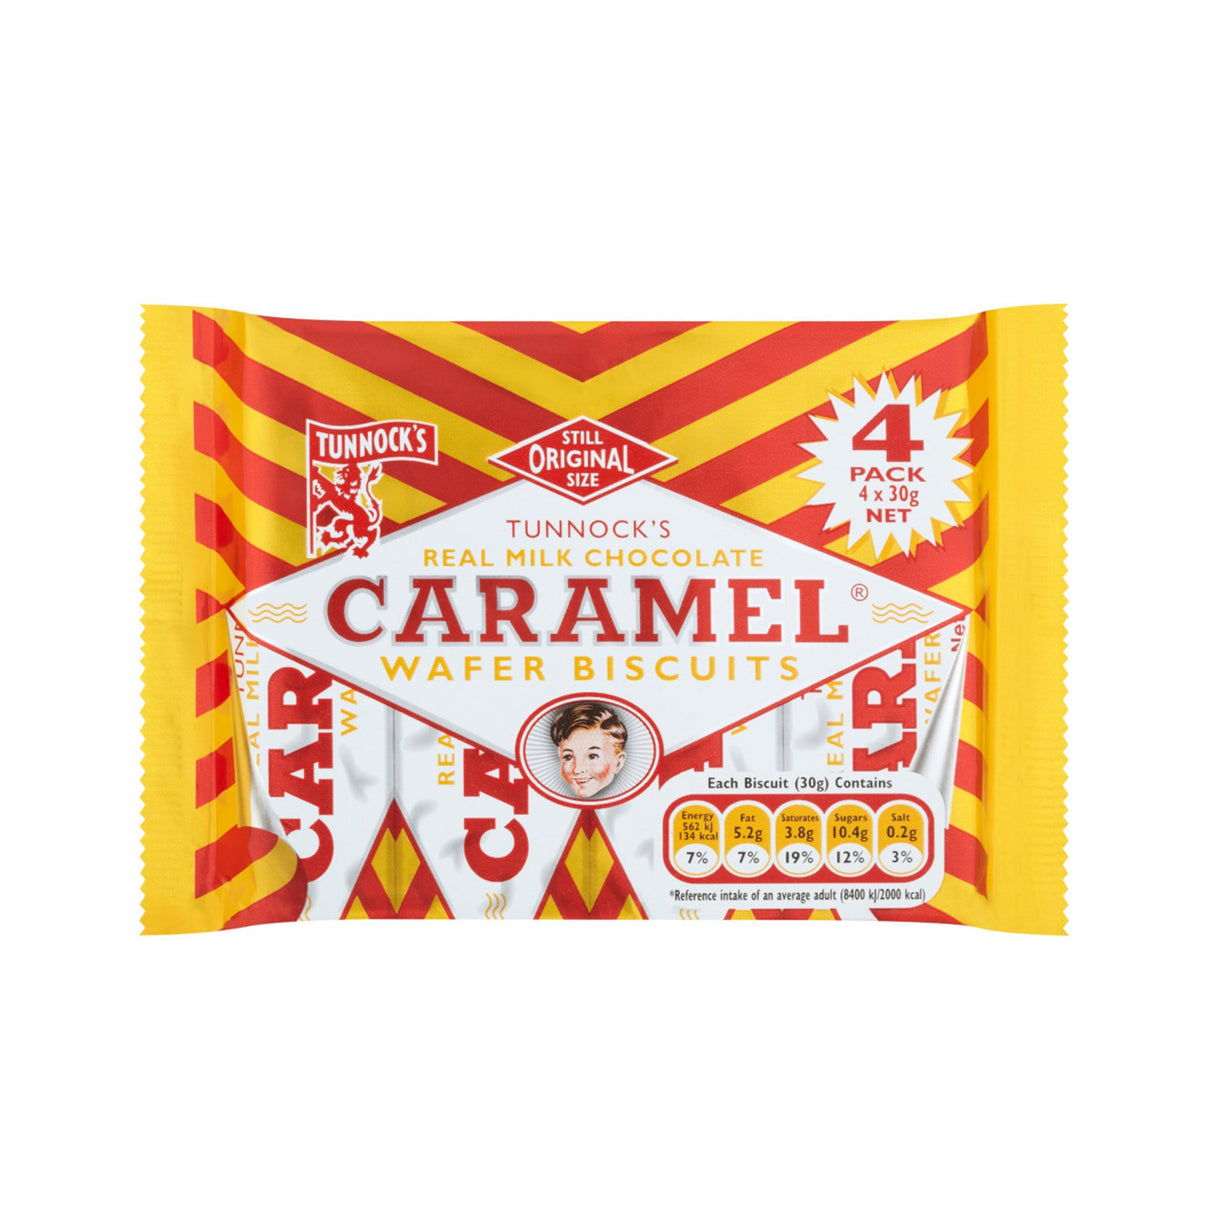 Tunnock's Caramel Wafer Biscuits Milk Chocolate 4 Pack 120g